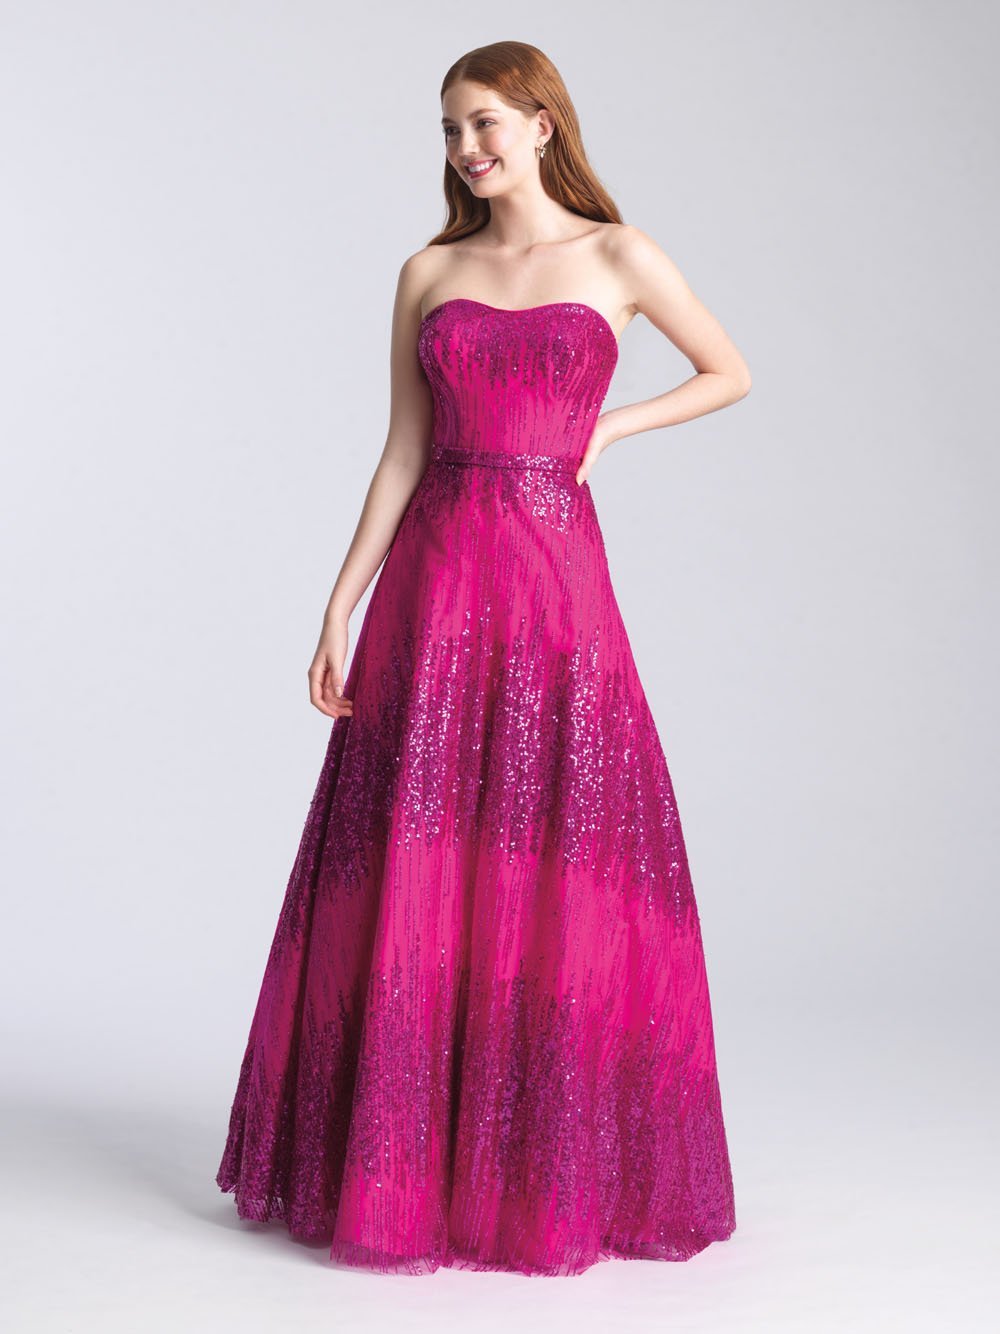 Madison James 20-321 dress images in these colors: Rose Gold, Gold, Navy, Fuchsia.